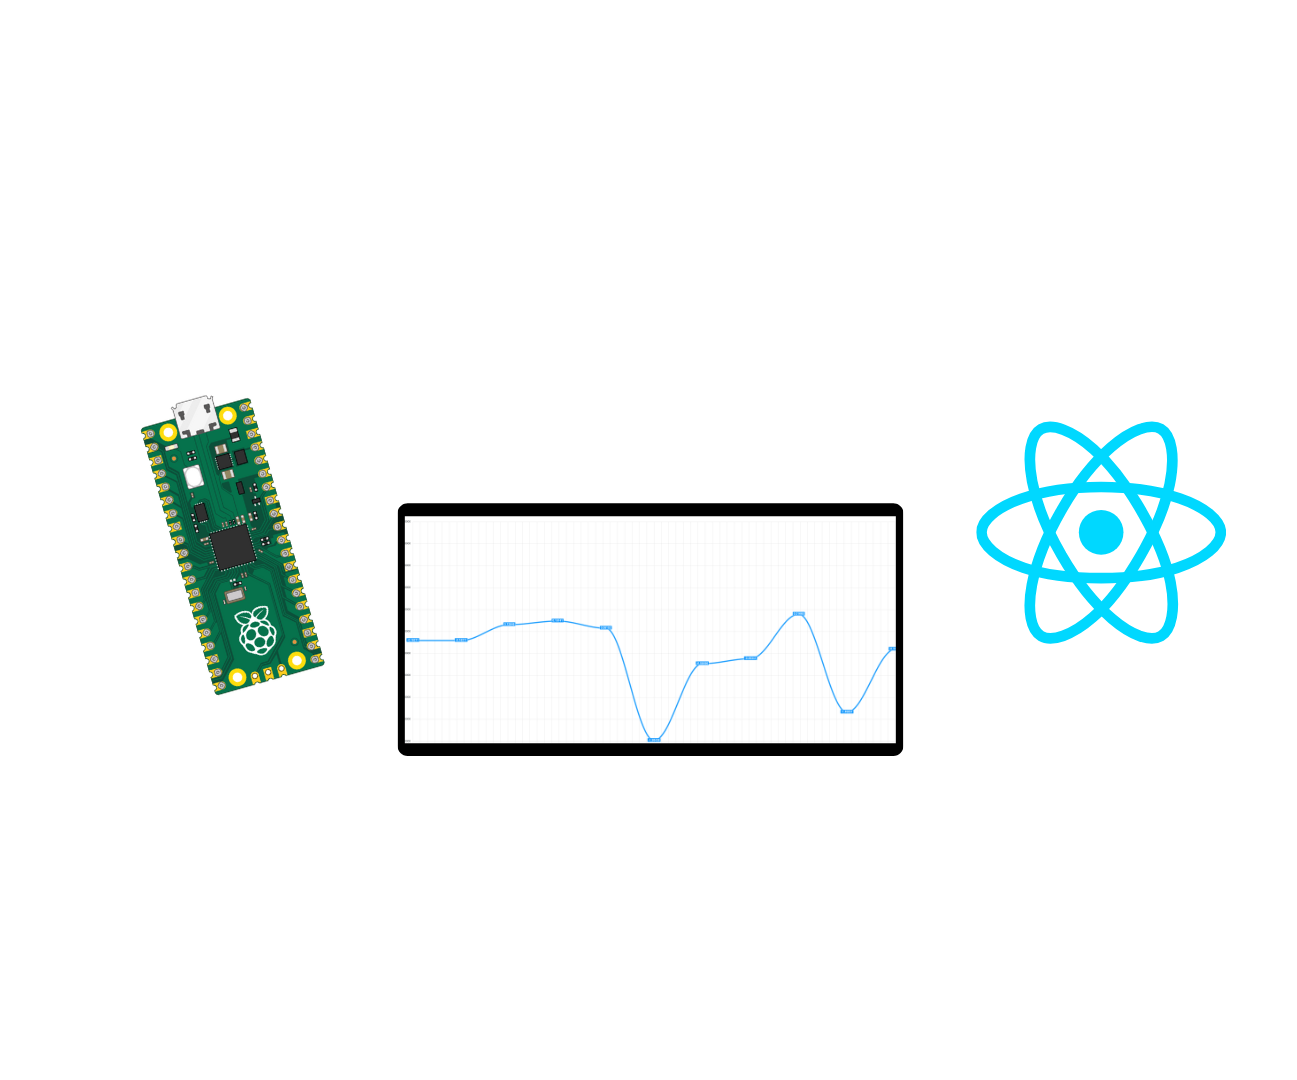 How to Stream Sensor Data From the Raspberry Pi Pico W to a React App in Real-Time Using ApexCharts